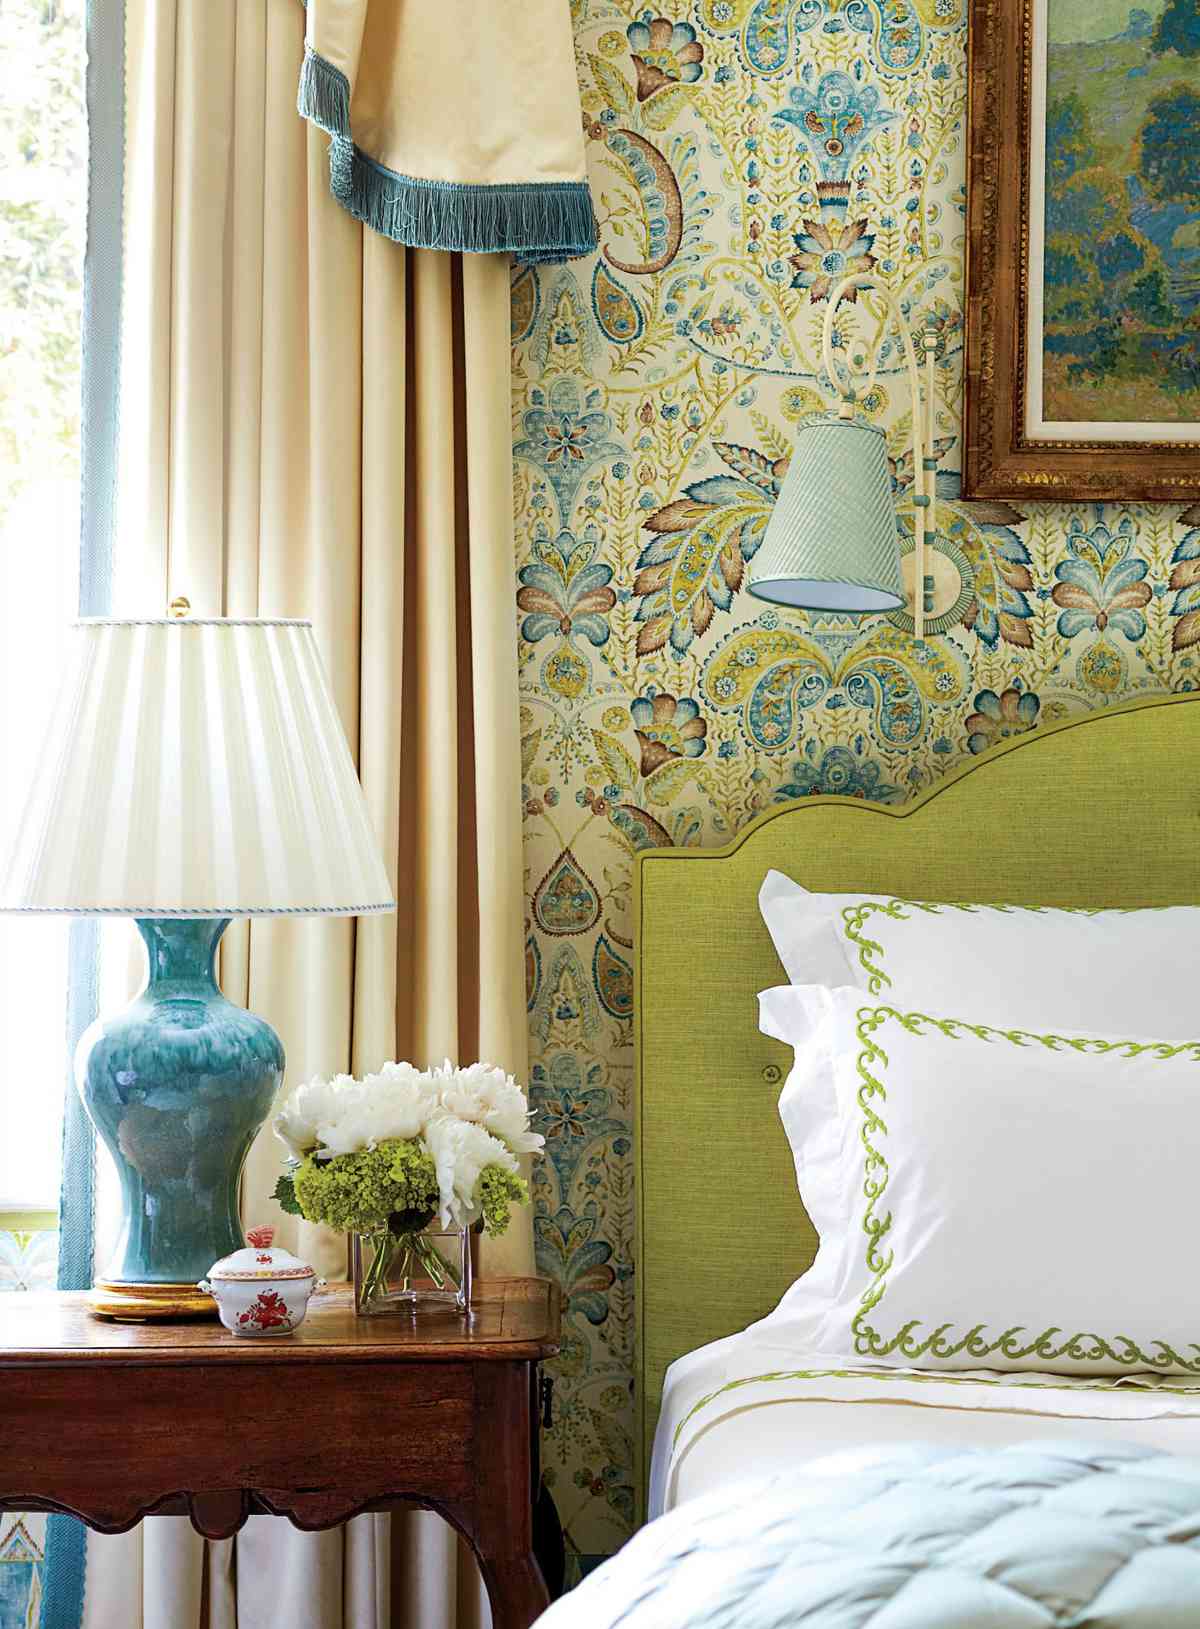 Biggest Decorating Don'ts: Color by Numbers Decorating